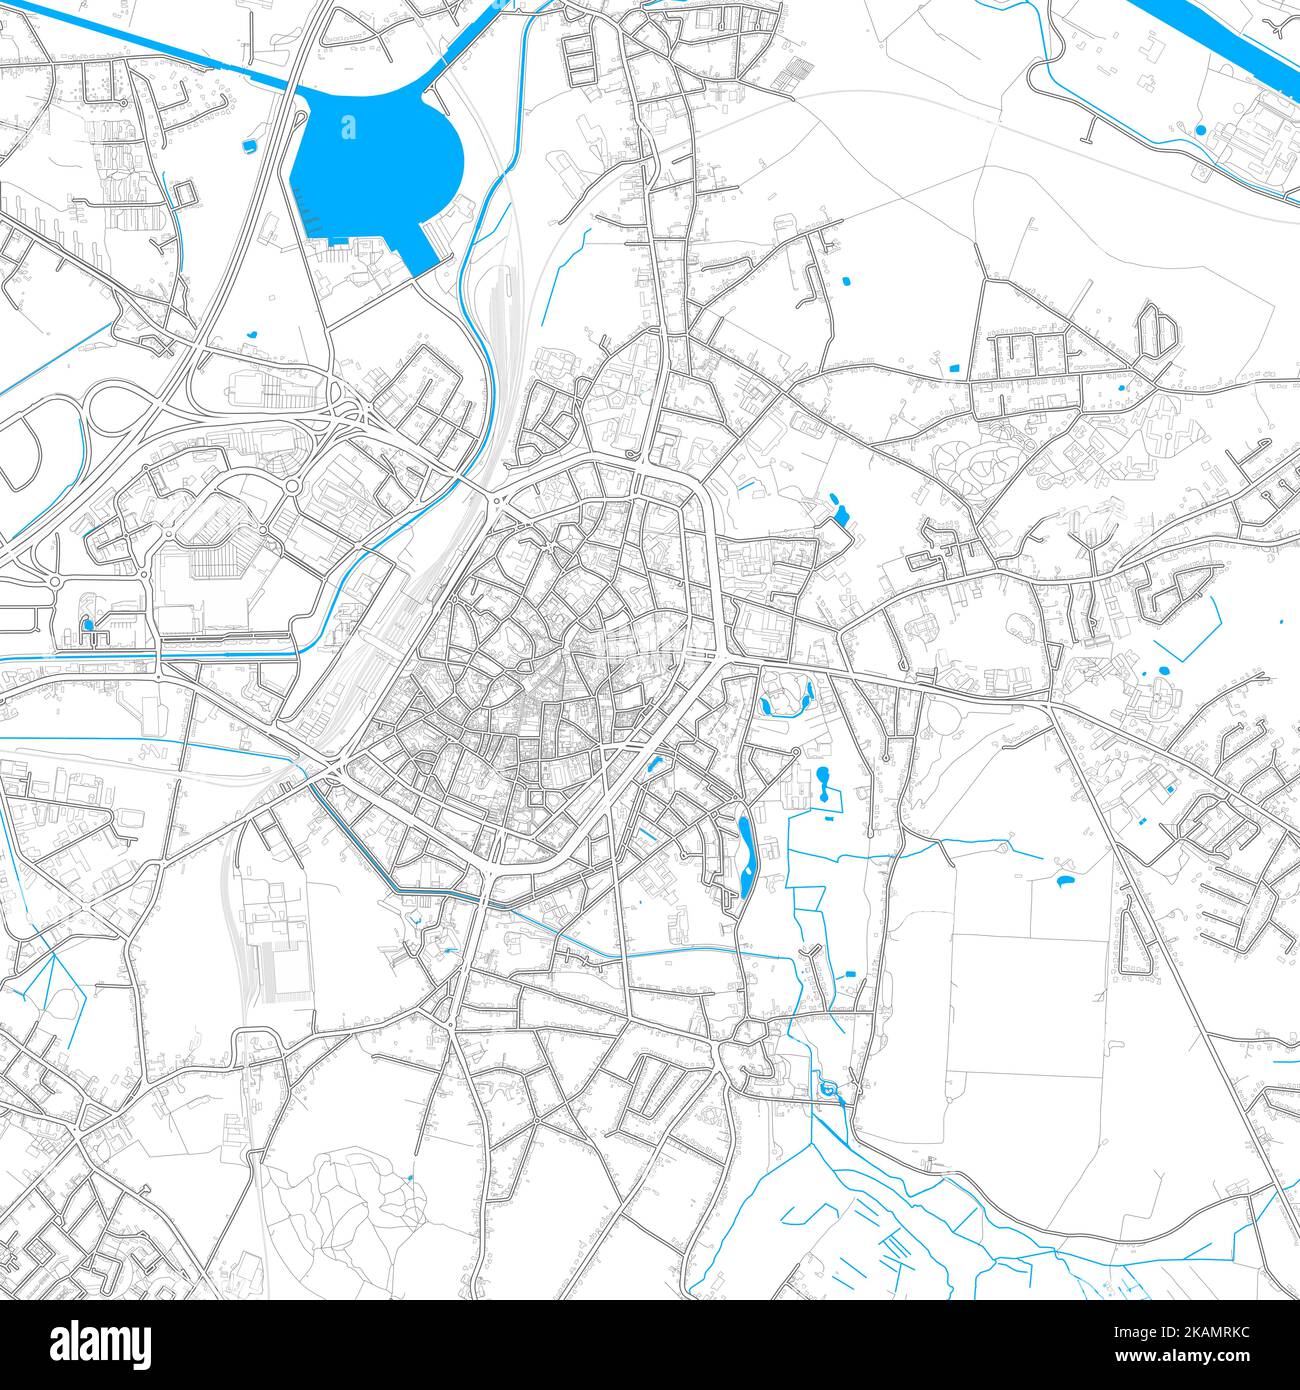 Mons, Hainaut, Belgium high resolution vector map with editable paths. Bright outlines for main roads. Use it for any printed and digital background. Stock Vector